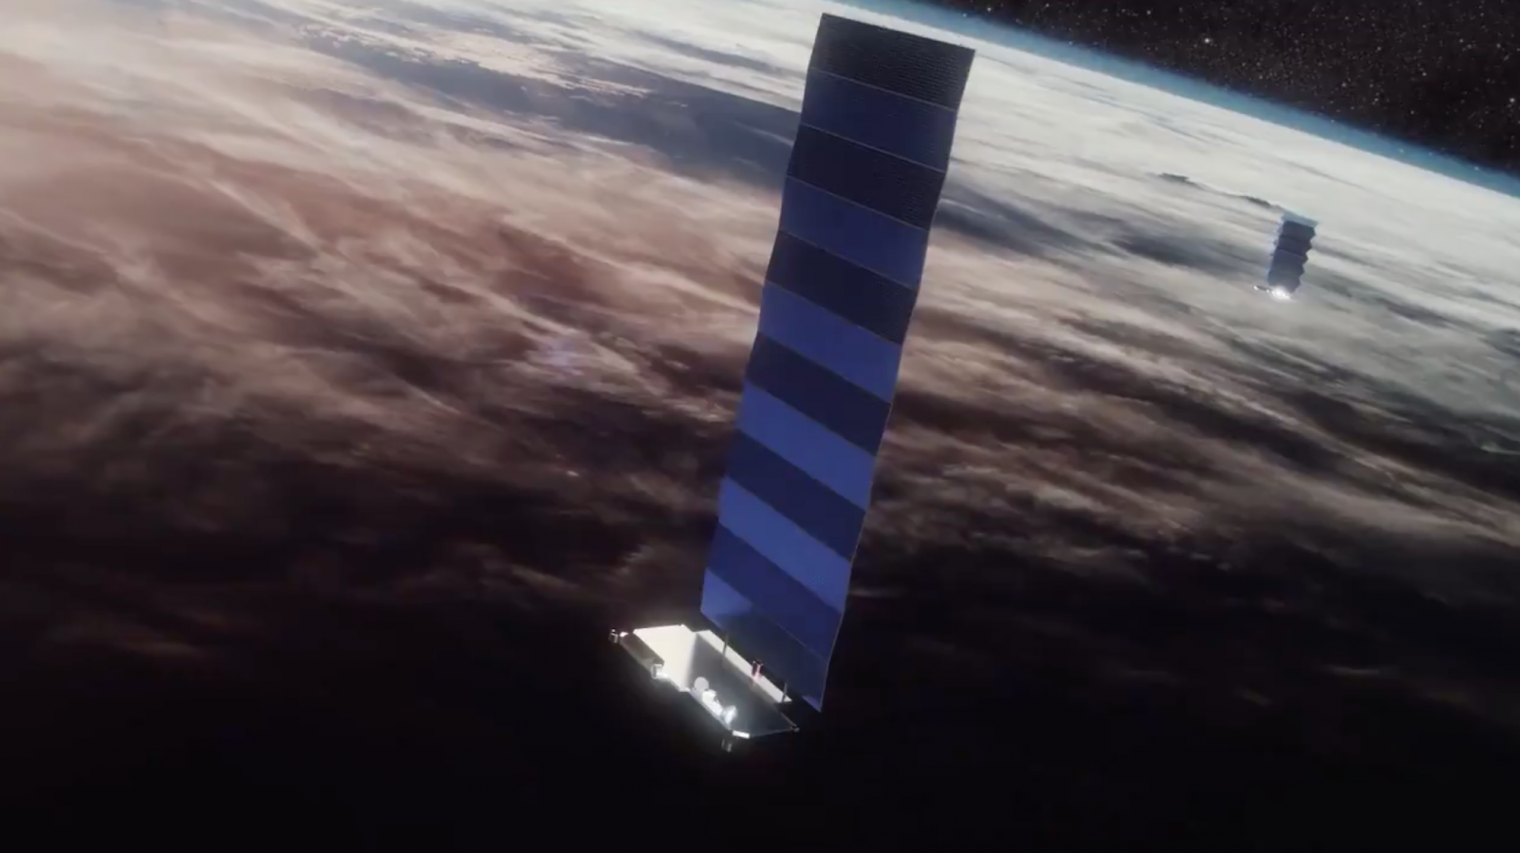 SpaceX’s Satellite Service Starlink gets preorder expansion as Elon